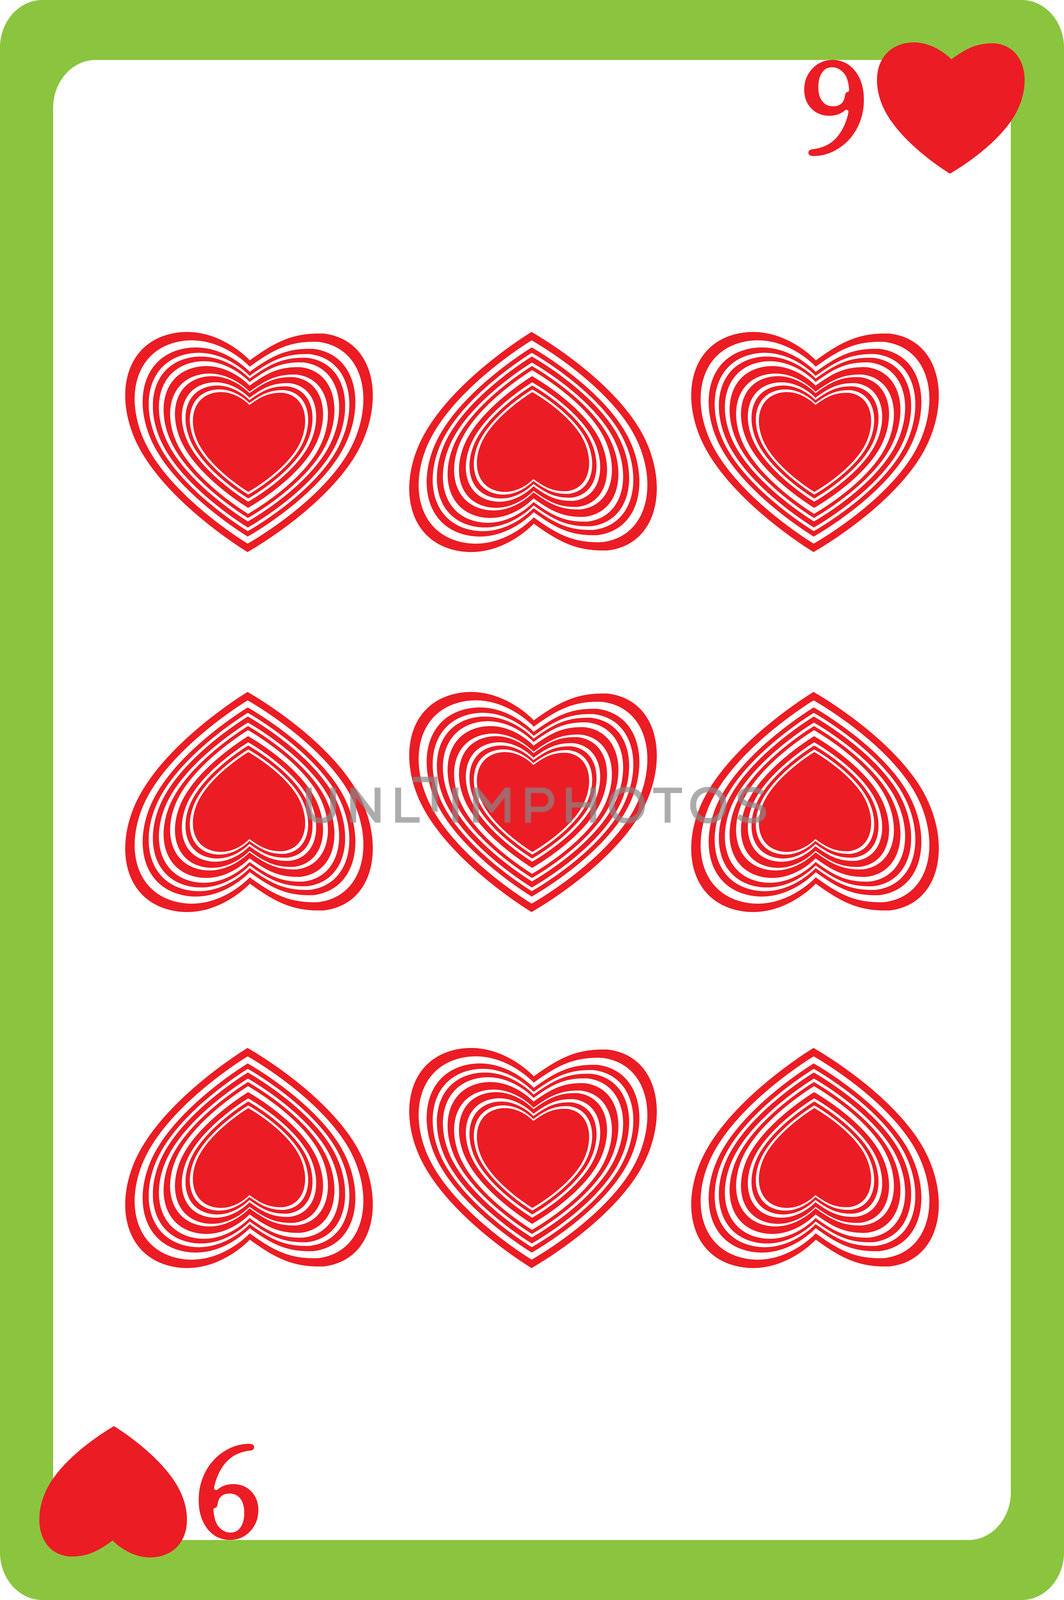 nine of hearts by catacos